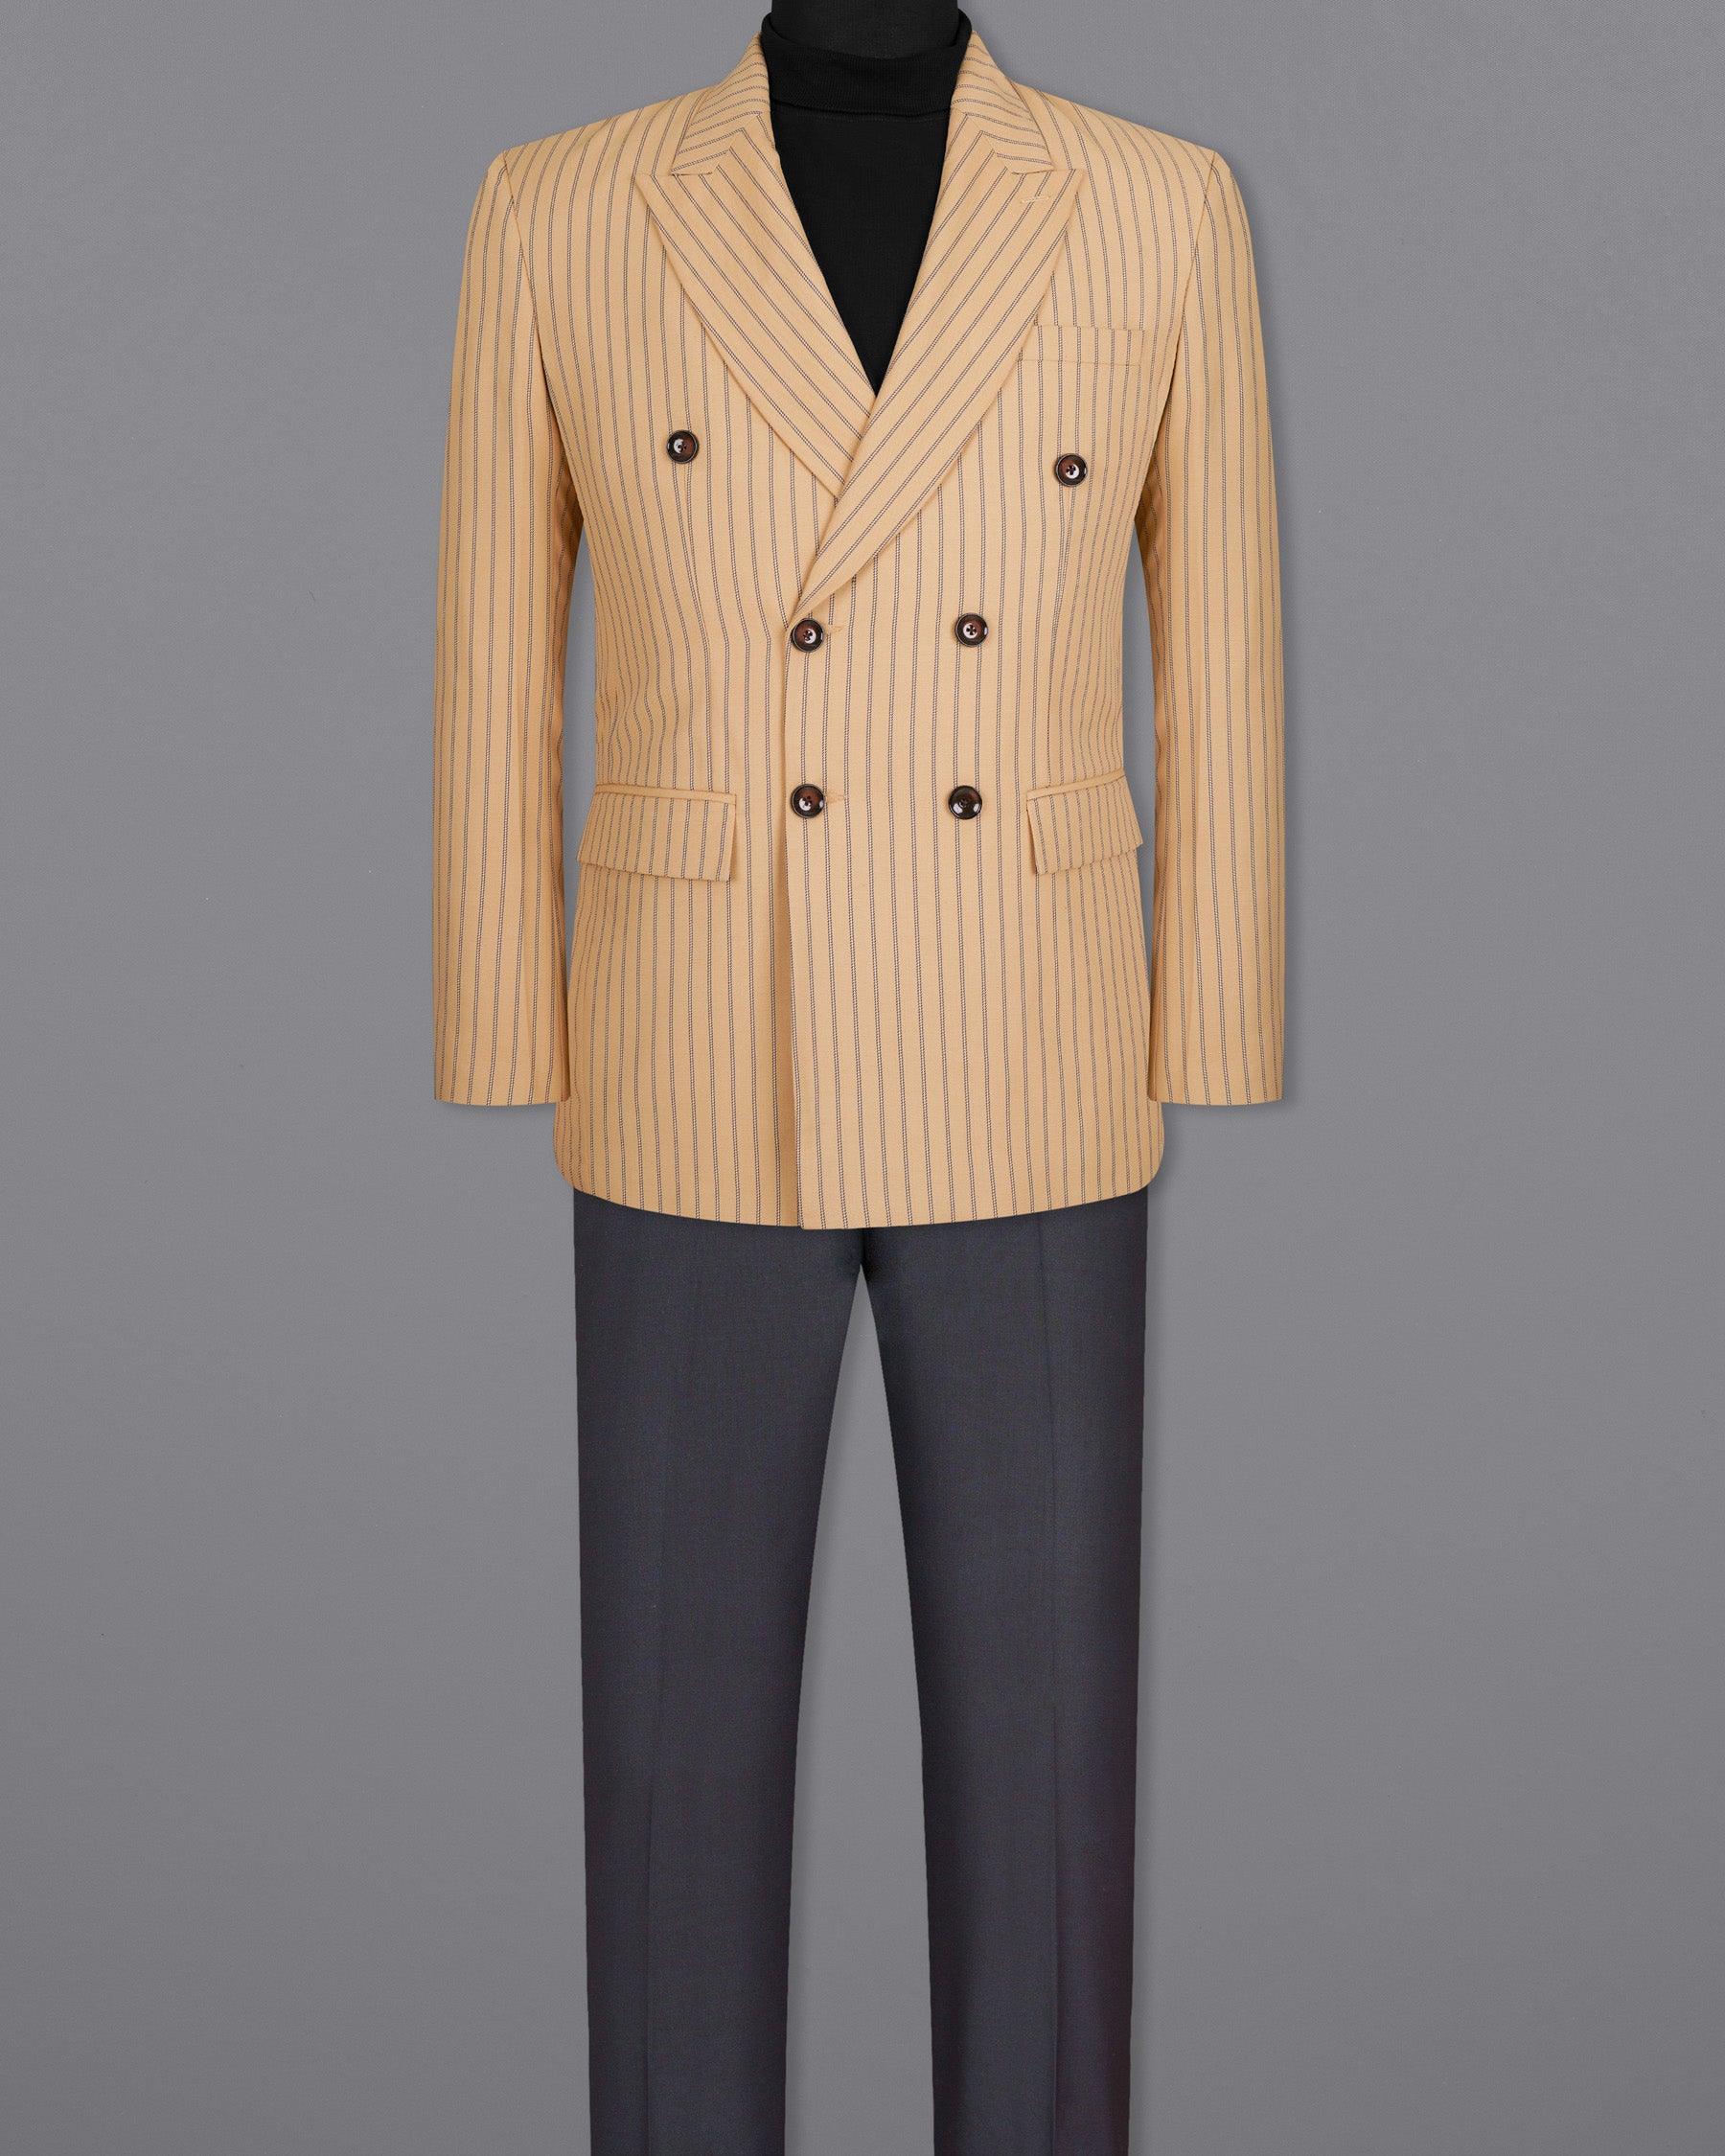 Harvest Gold Cream Striped Woolrich Double-breasted Suit